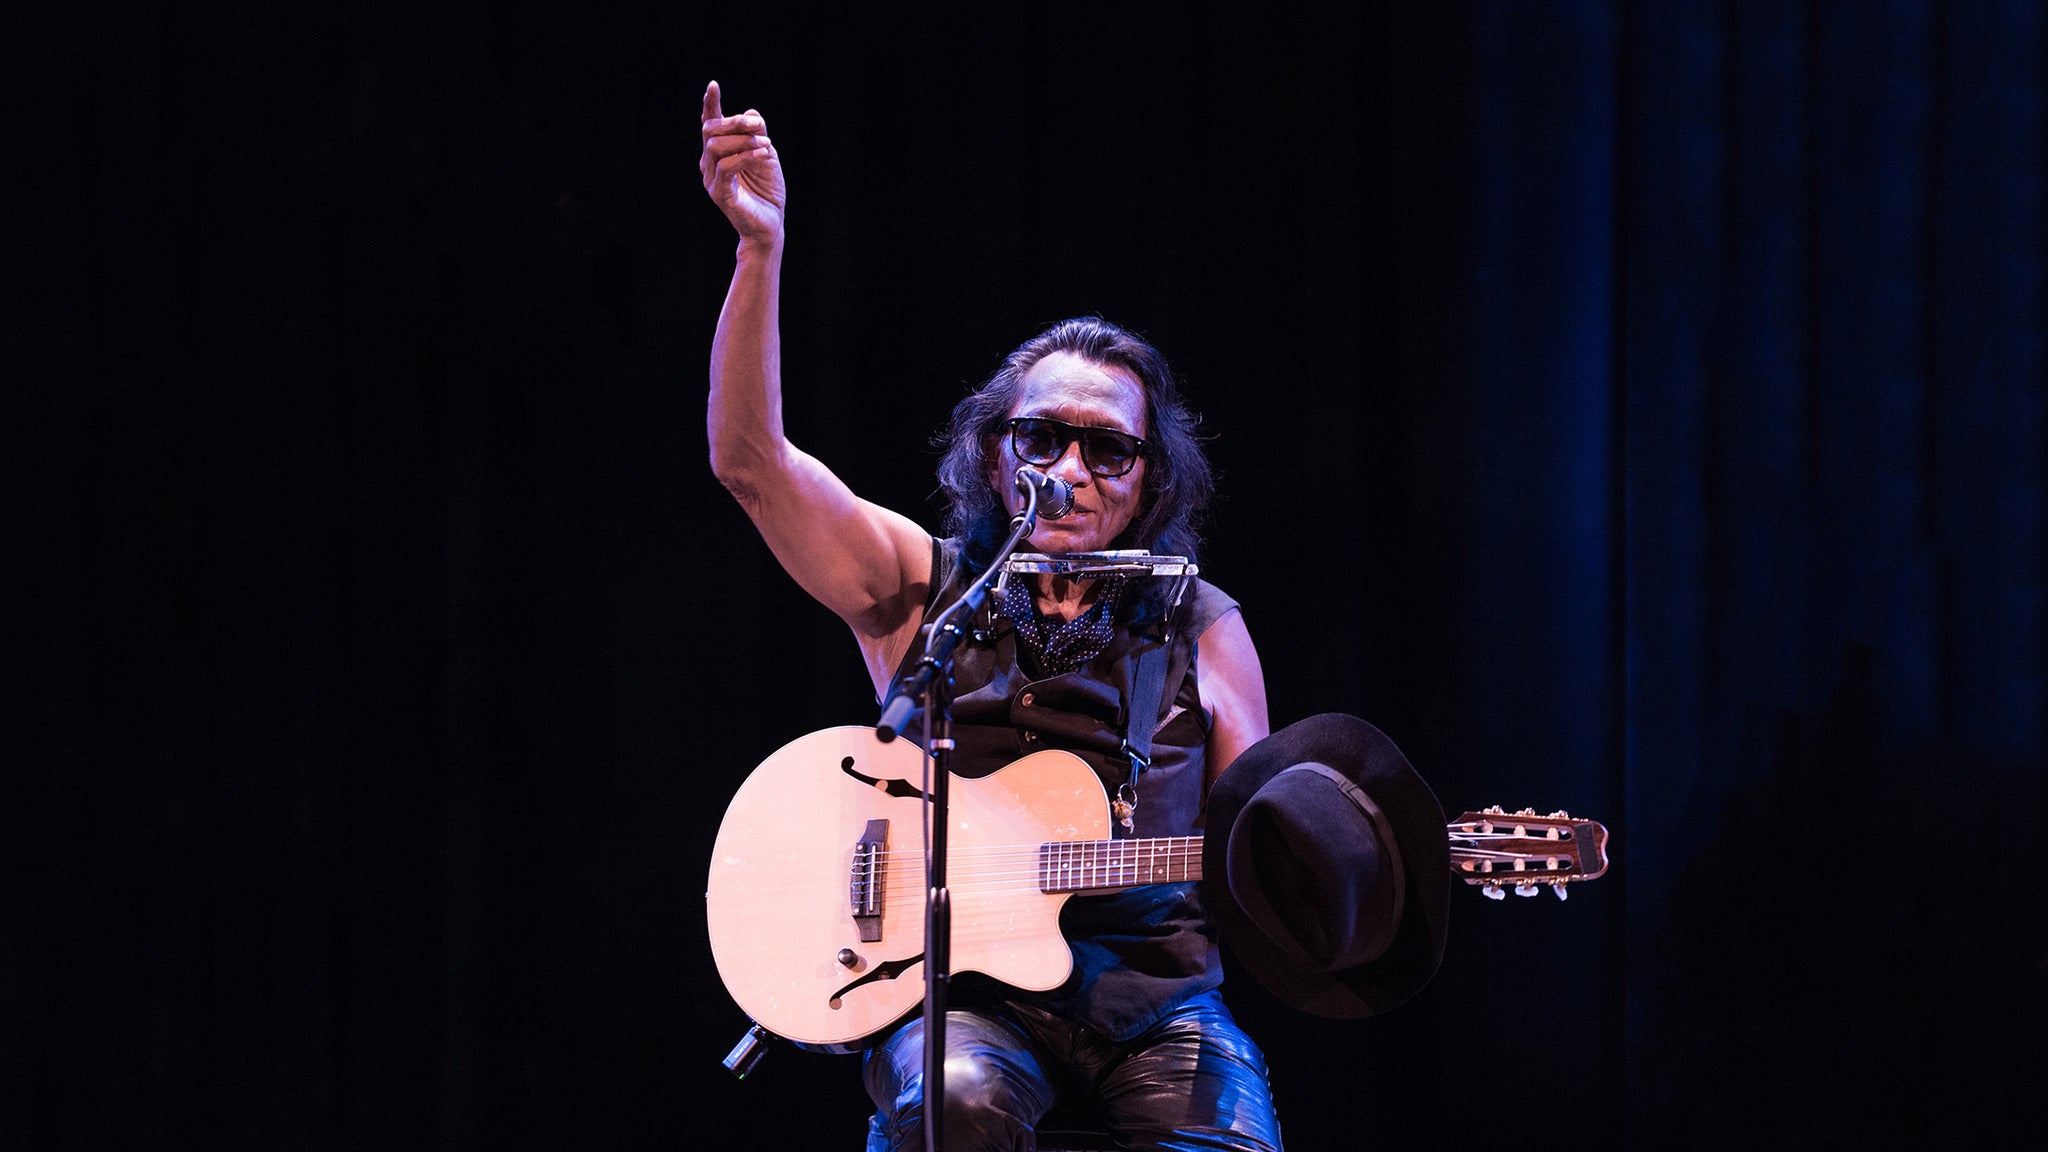 Rodriguez in Vancouver promo photo for Facebook presale offer code